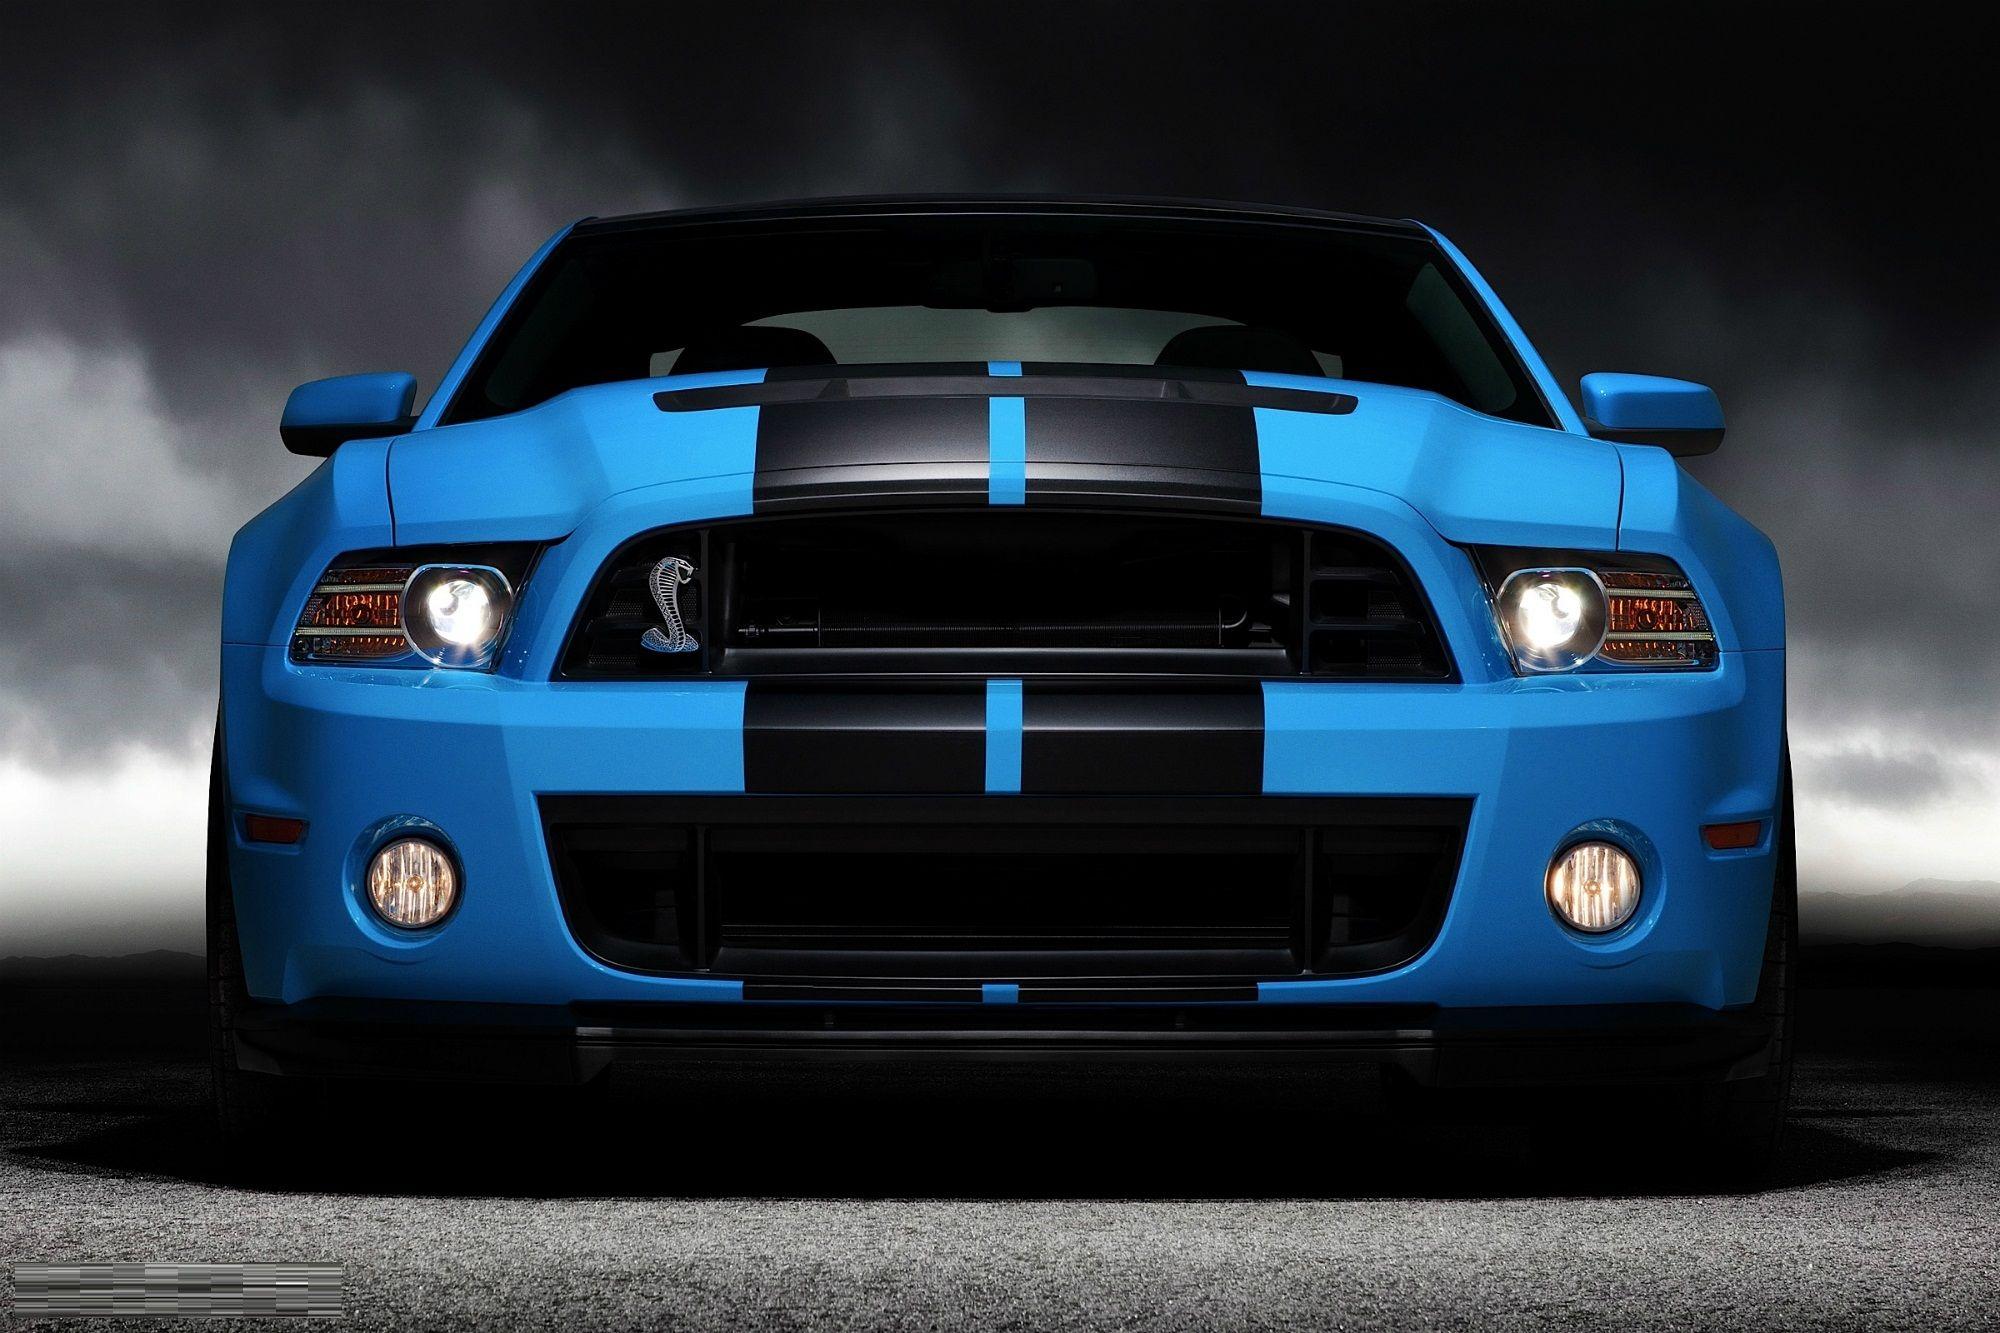 Blue Ford Mustang Shelby GT500 Car Picture HD Wallpaper. ad